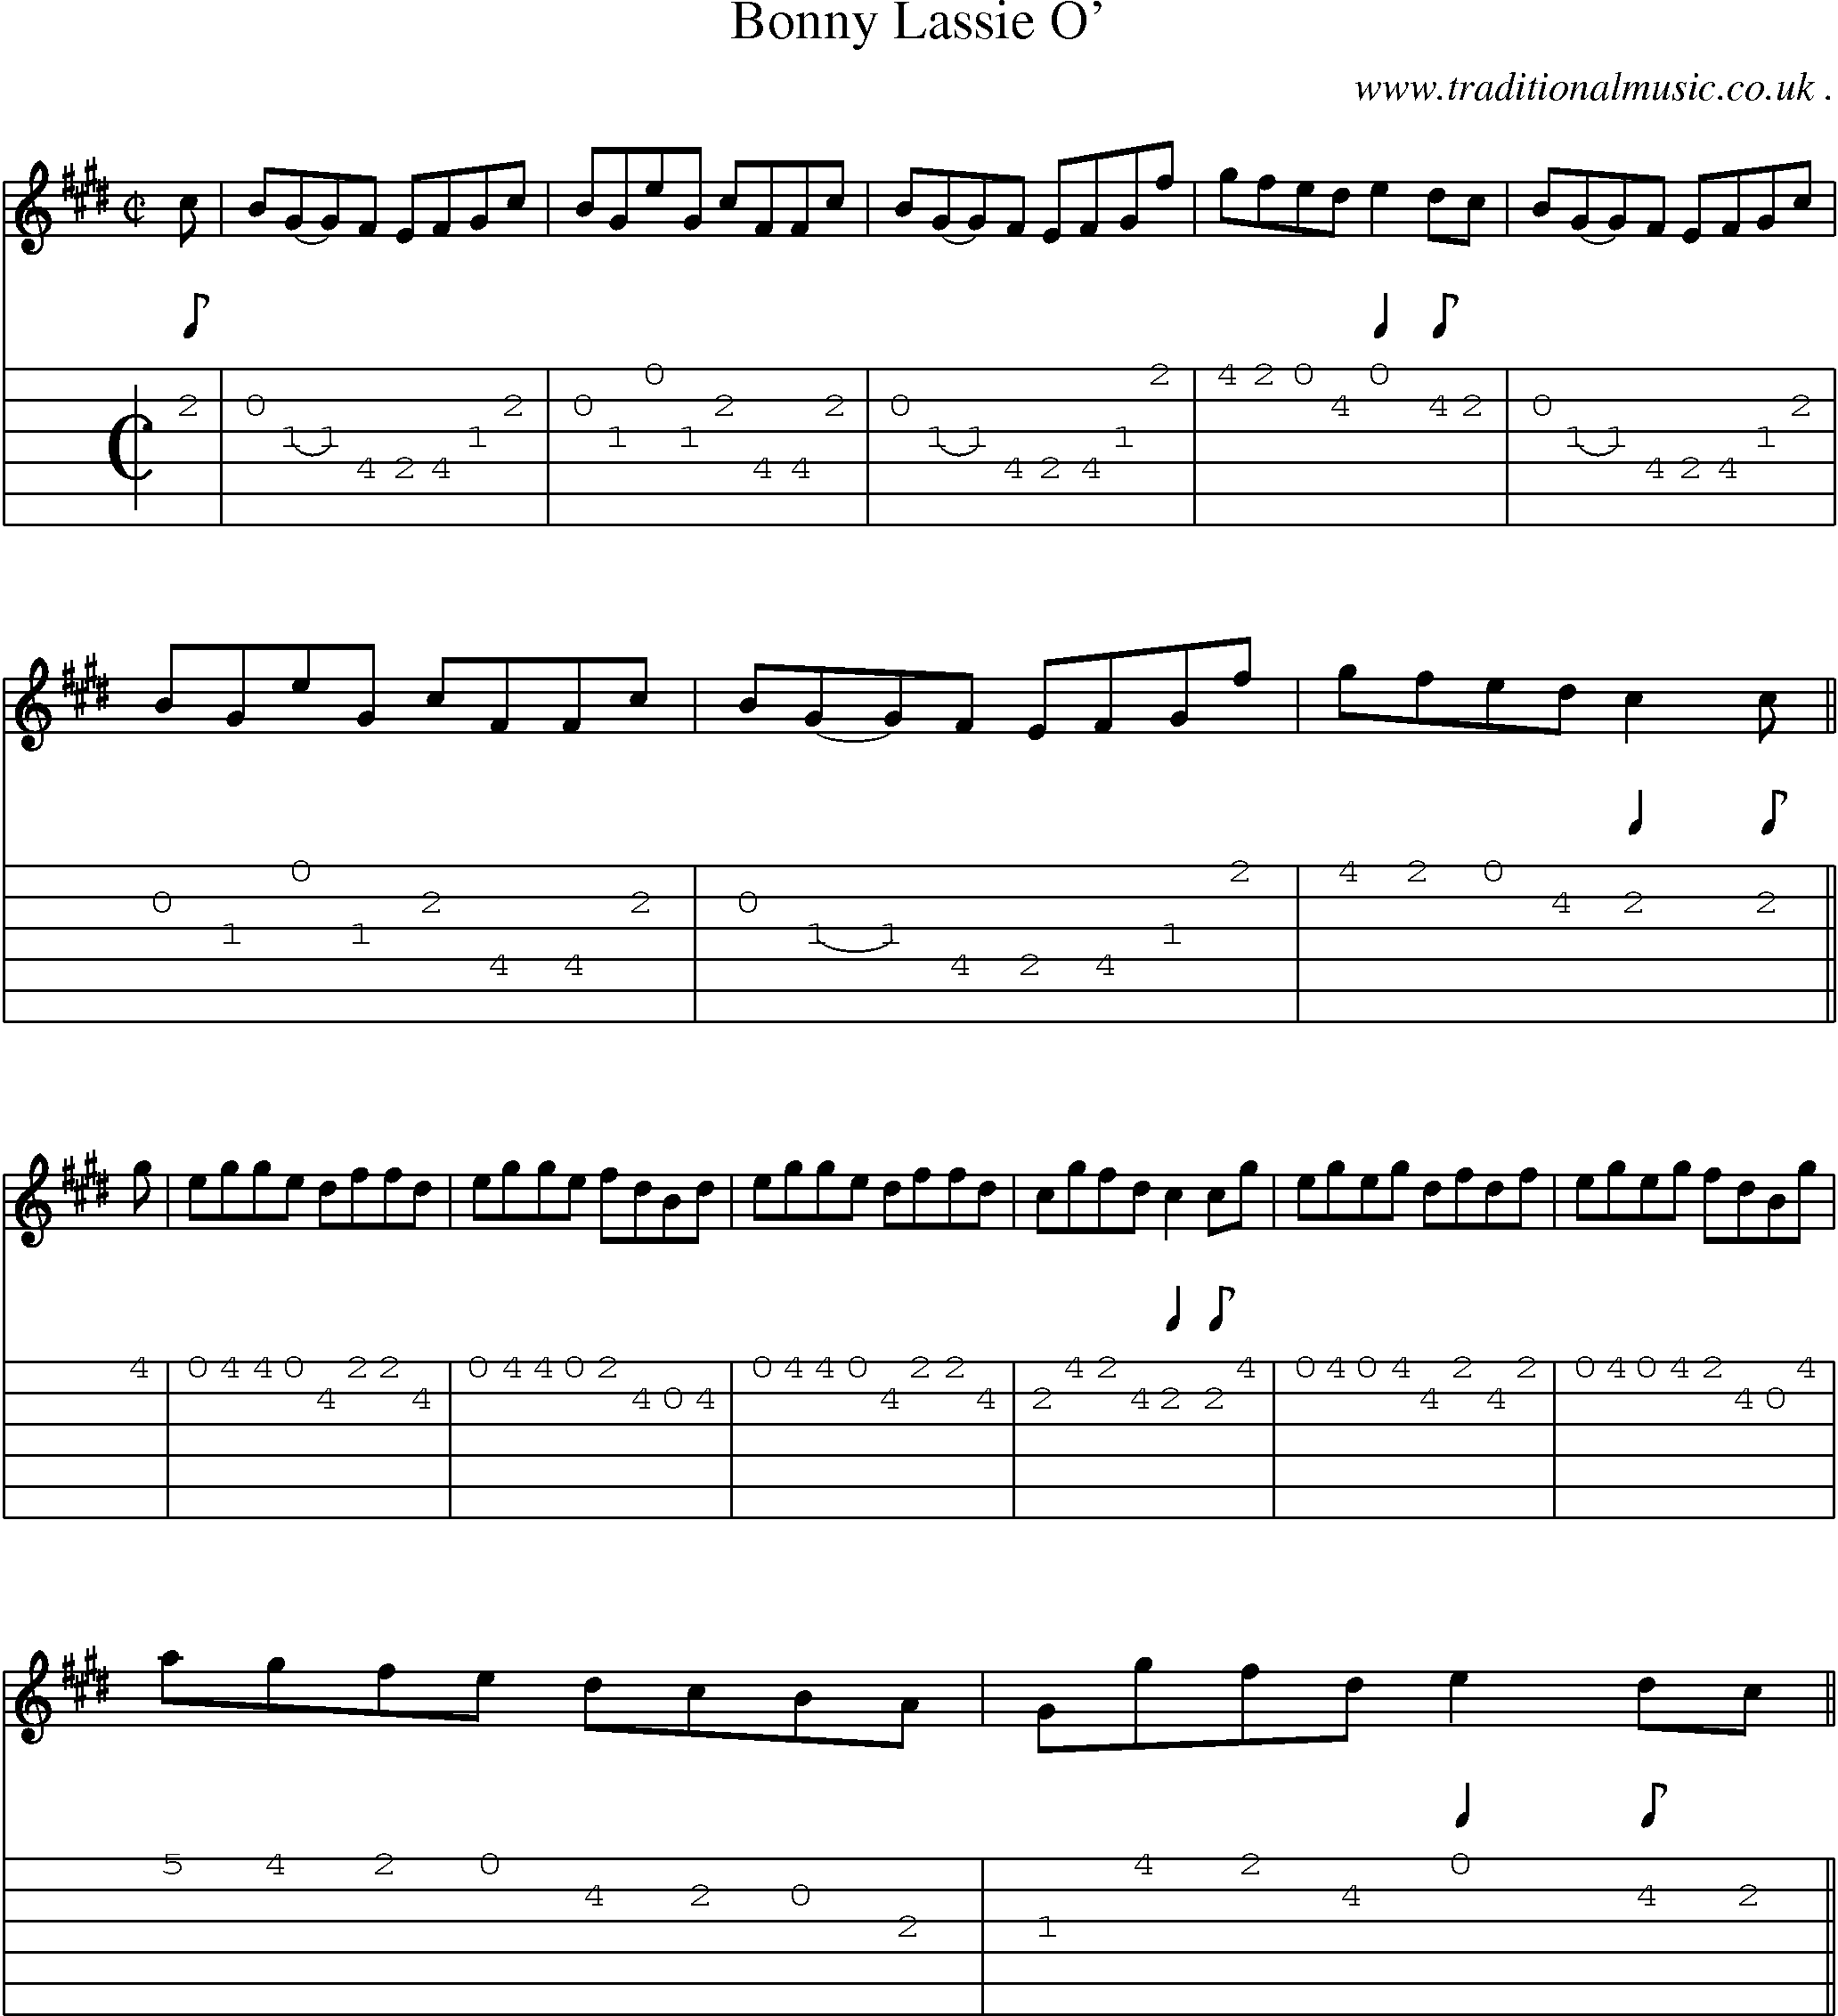 Sheet-music  score, Chords and Guitar Tabs for Bonny Lassie O